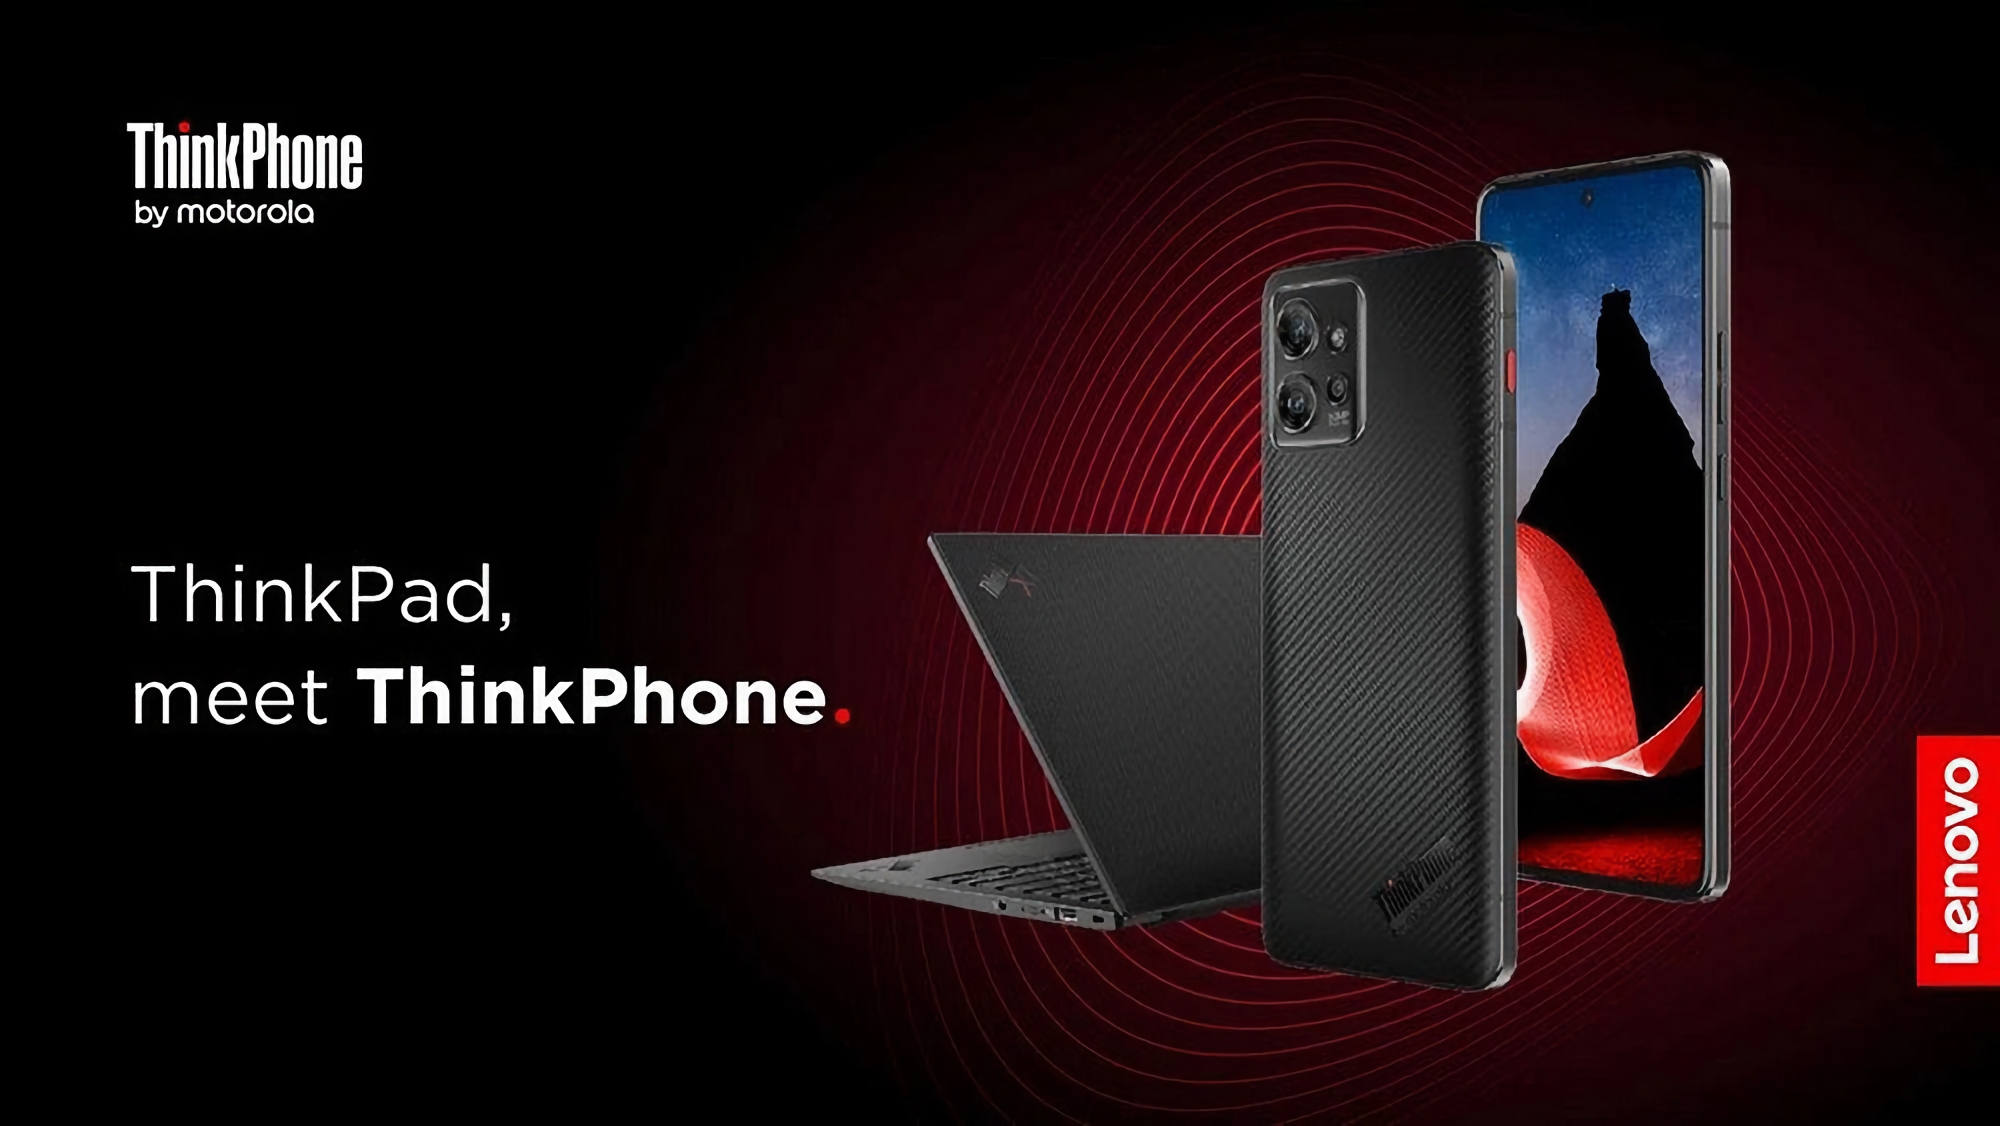 ThinkPhone by Motorola with Snapdragon 8+ Gen 1 chip, 144 Hz screen and IP68 protection will be released in Europe, the novelty will cost 1000 euros